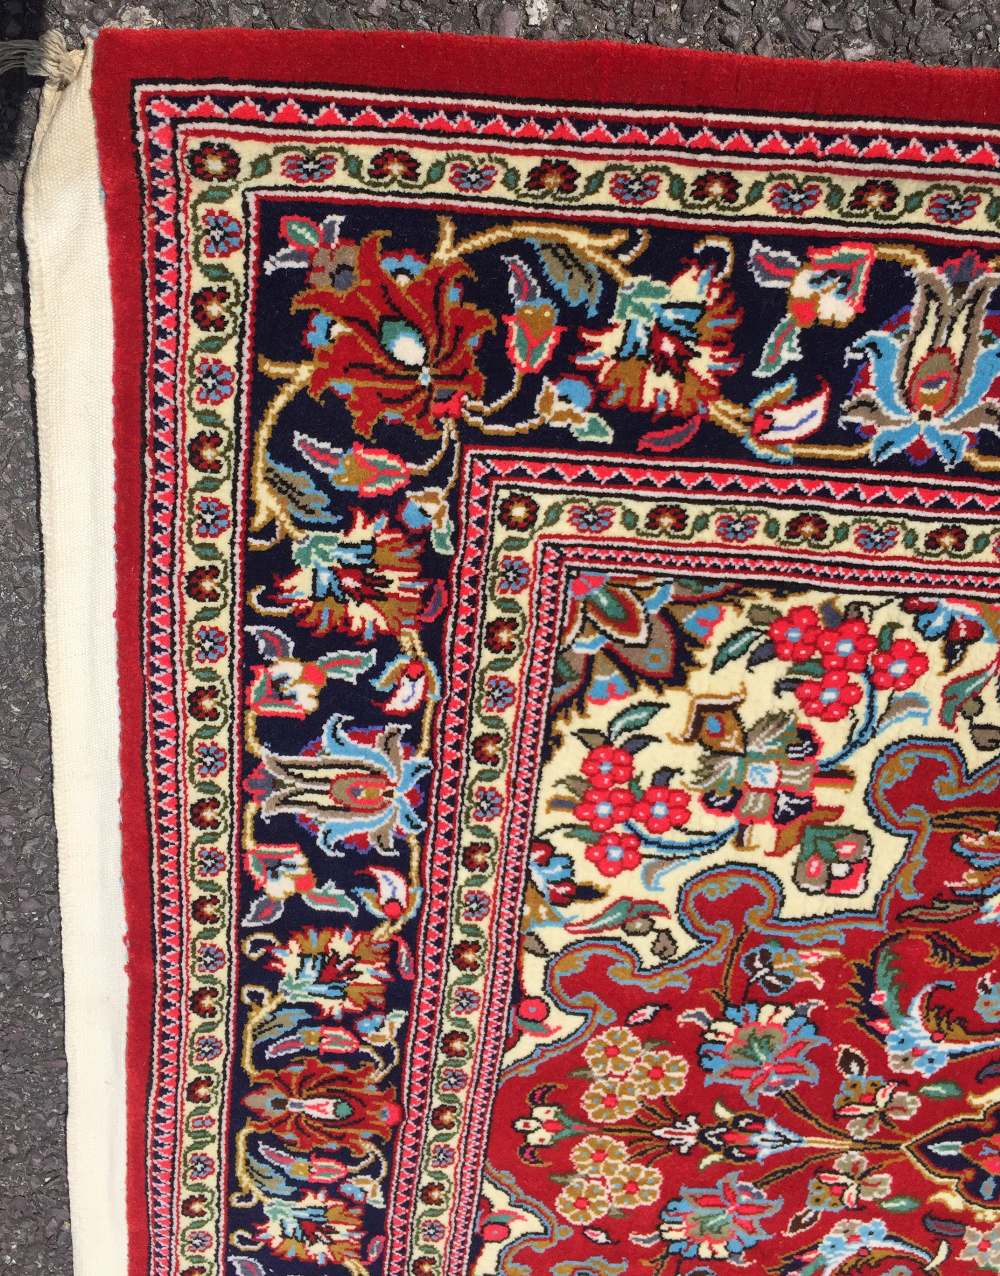 A VERY FINE 20TH CENTURY PERSIAN ‘QUM’ WOOL FLOOR RUG, in excellent condition, it once hung on the - Image 6 of 7